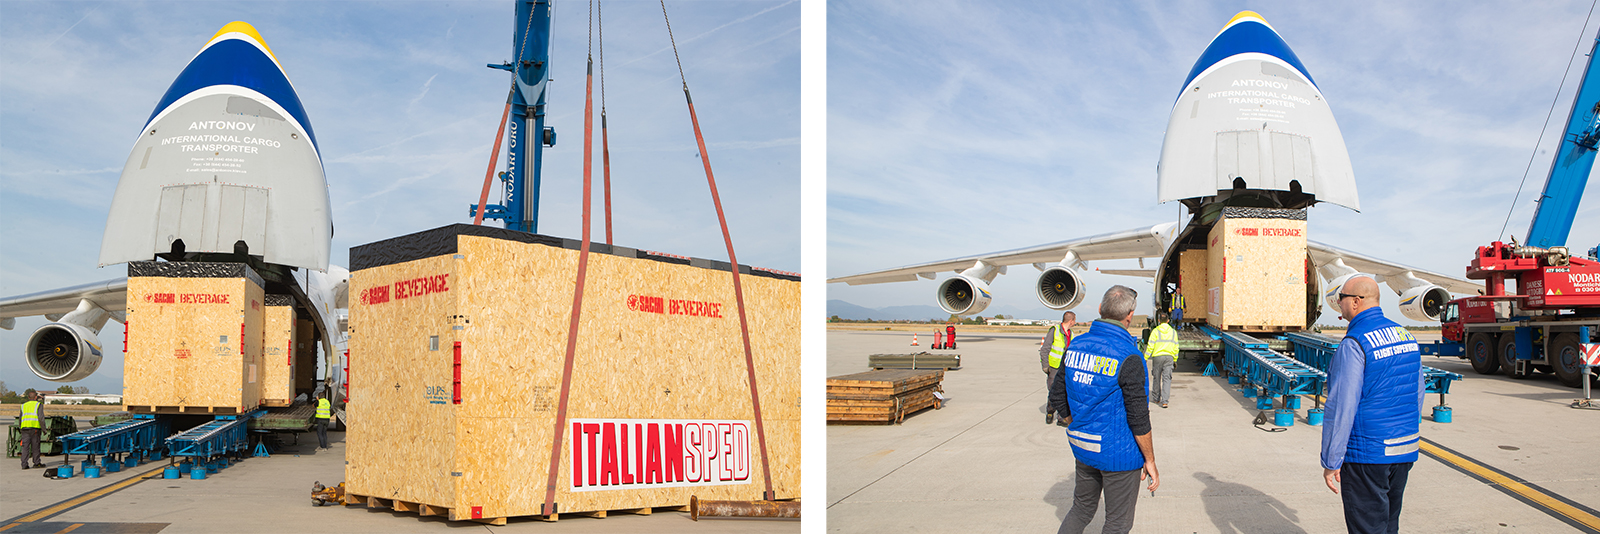 AIR TRANSPORT IN UGANDA: ITALIANSPED AMONG THE BIGGEST IN PROJECT CARGO